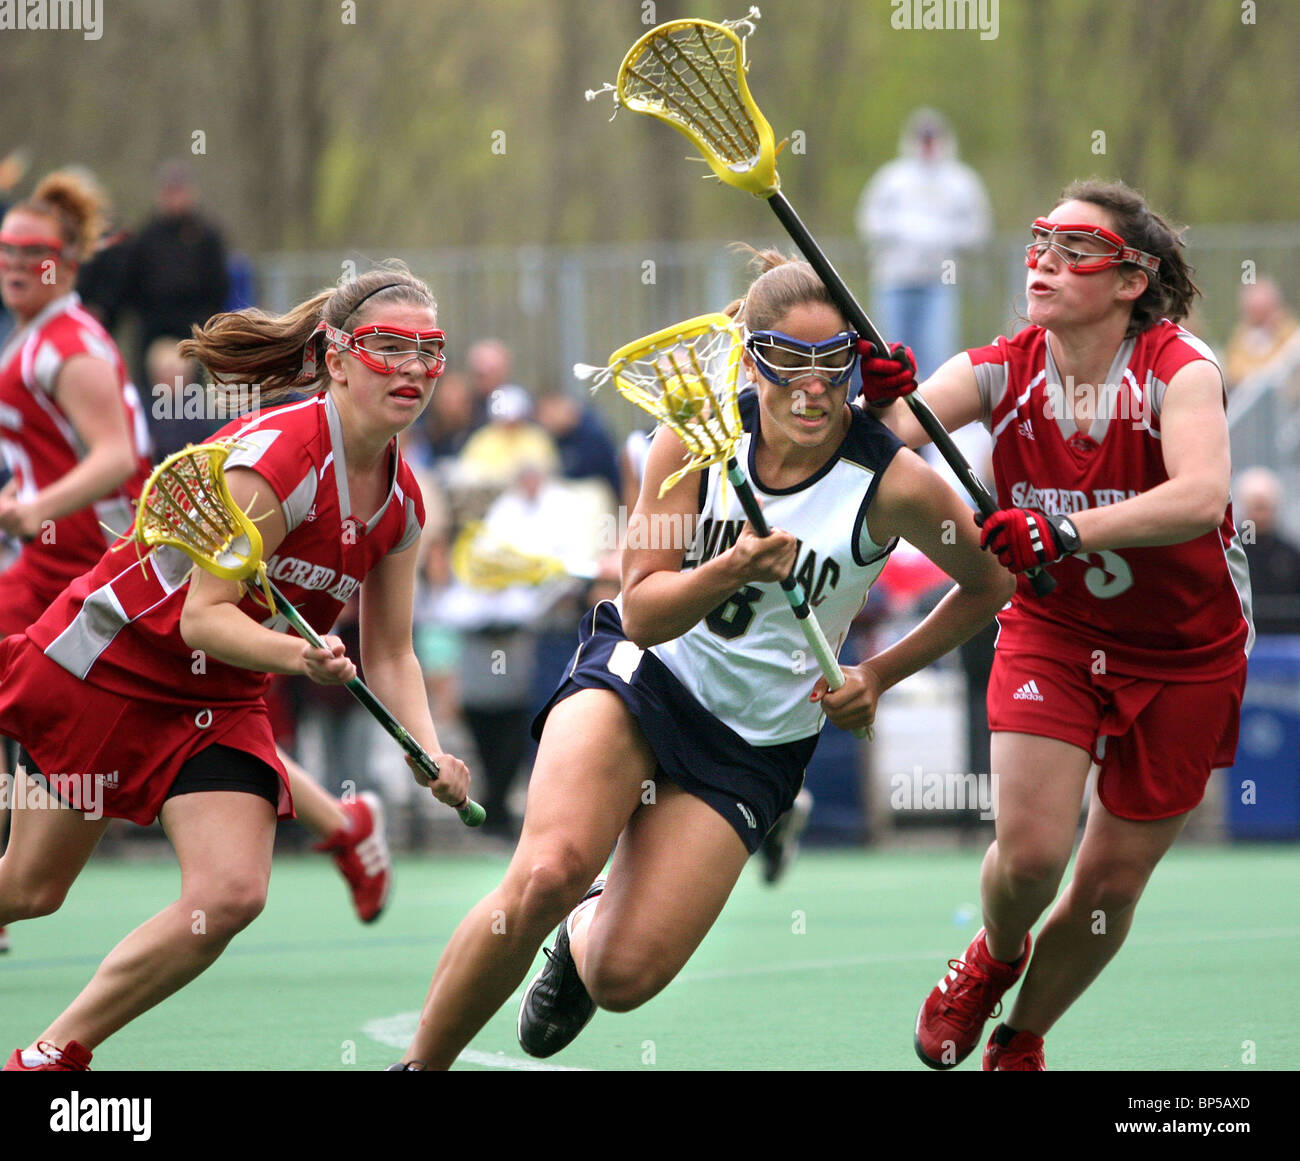 Frauen College Lacrosse Aktion in Connecticut USA Stockfoto